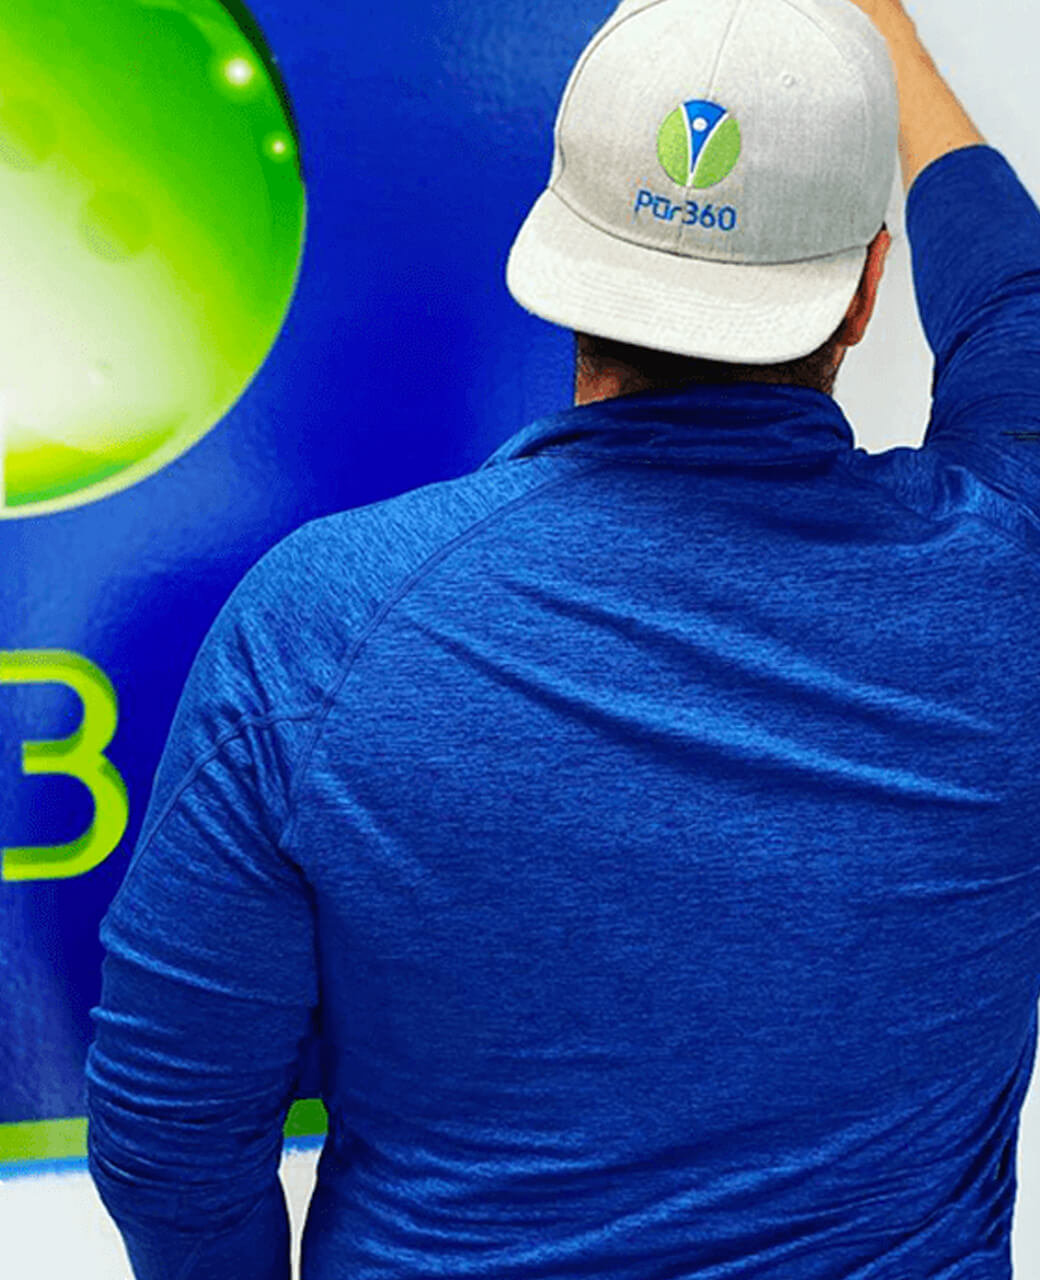 Pur360 technician wearing a blue shirt with a Pur360 branded hat